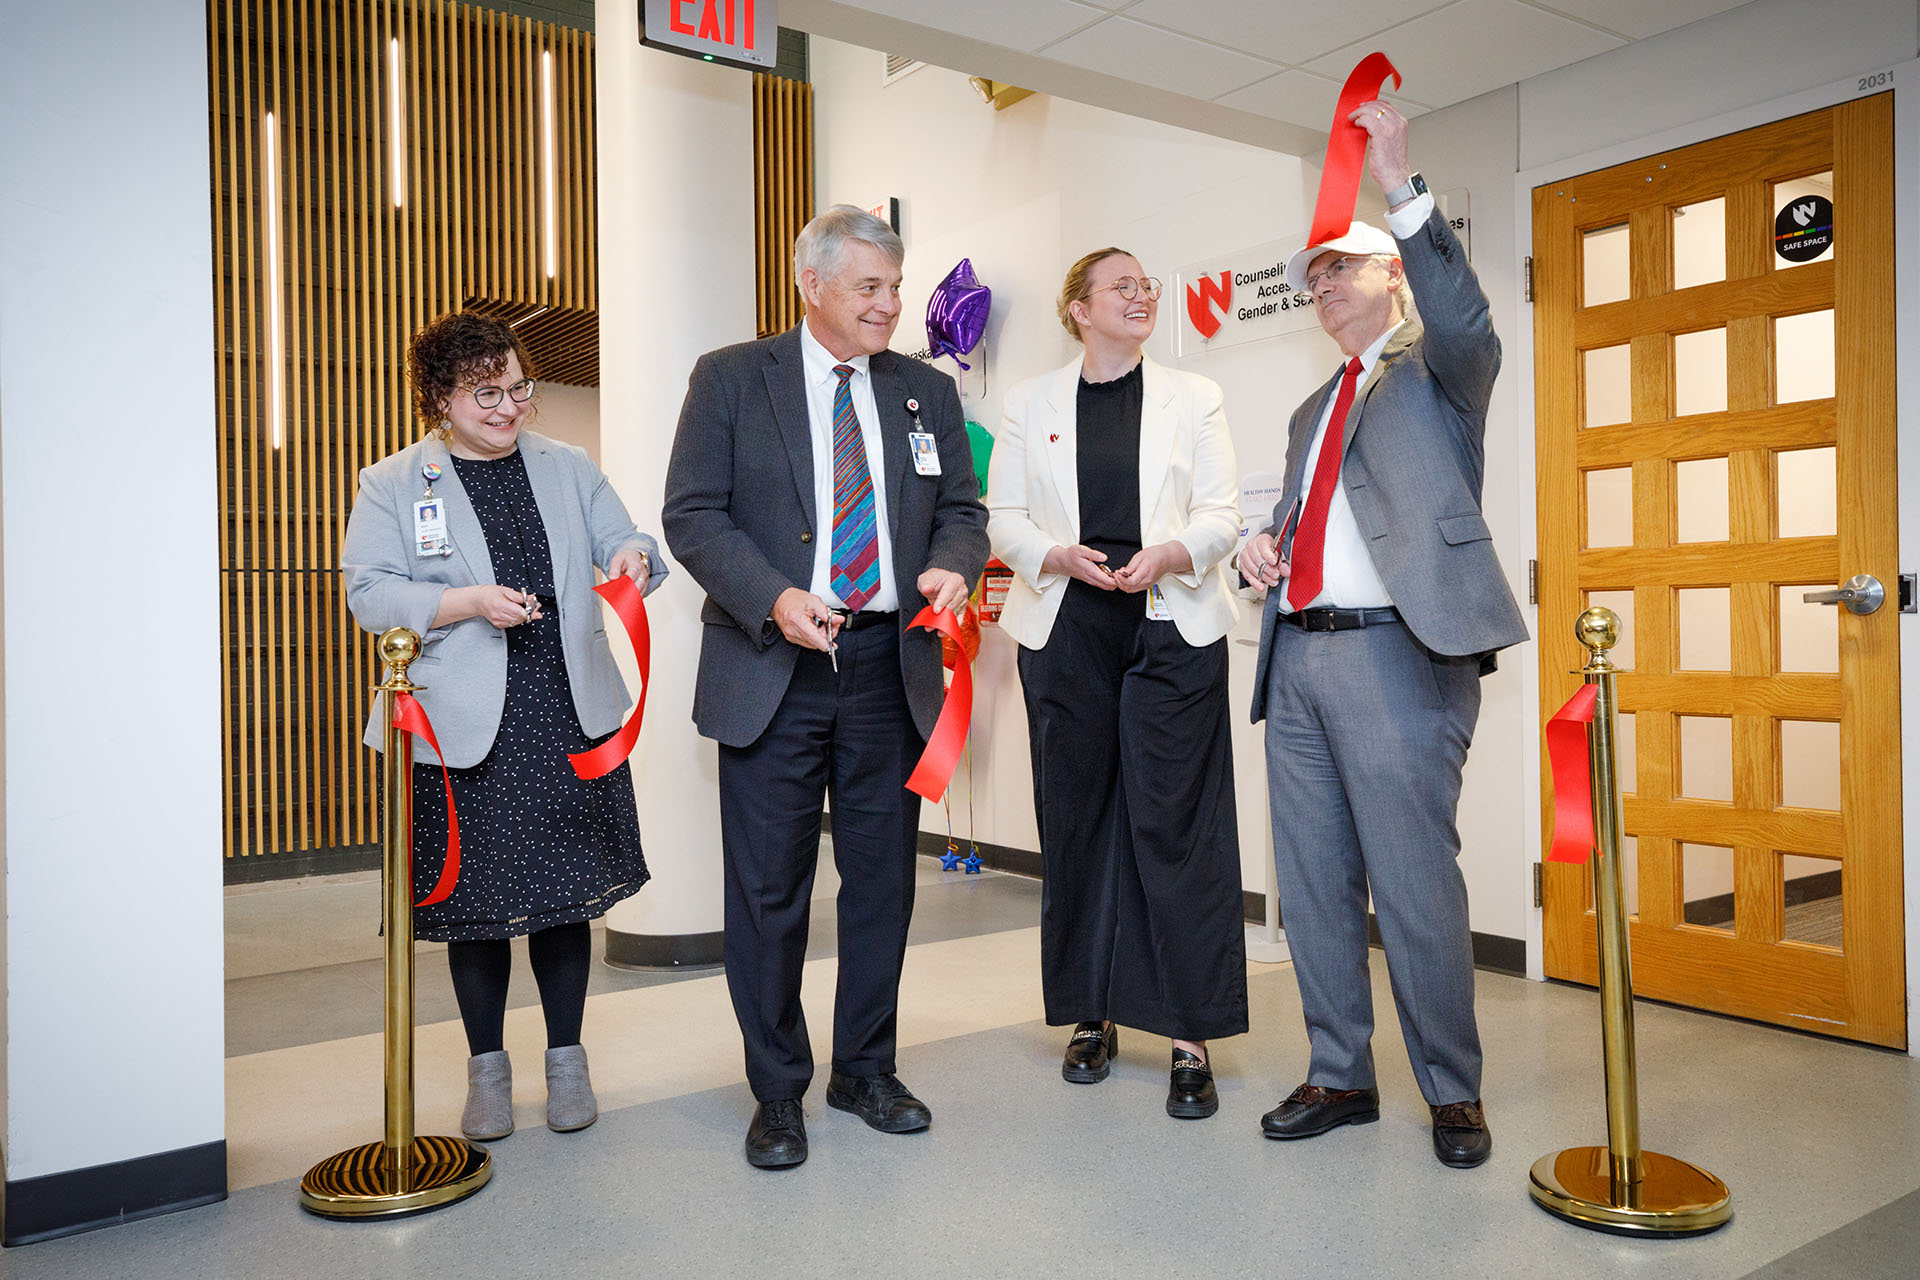 Cutting the ribbon Friday on the new Nebraska Medicine UNMC Student Health Clinic are&comma; from left&colon; Katryn Stratman&comma; clinic manager&semi; Jim Linder&comma; MD&comma; CEO of Nebraska Medicine&comma; Katie Schultis&comma; president of the UNMC Student Senate&comma; and Jeffrey P&period; Gold&comma; MD&comma;  UNMC chancellor&period;